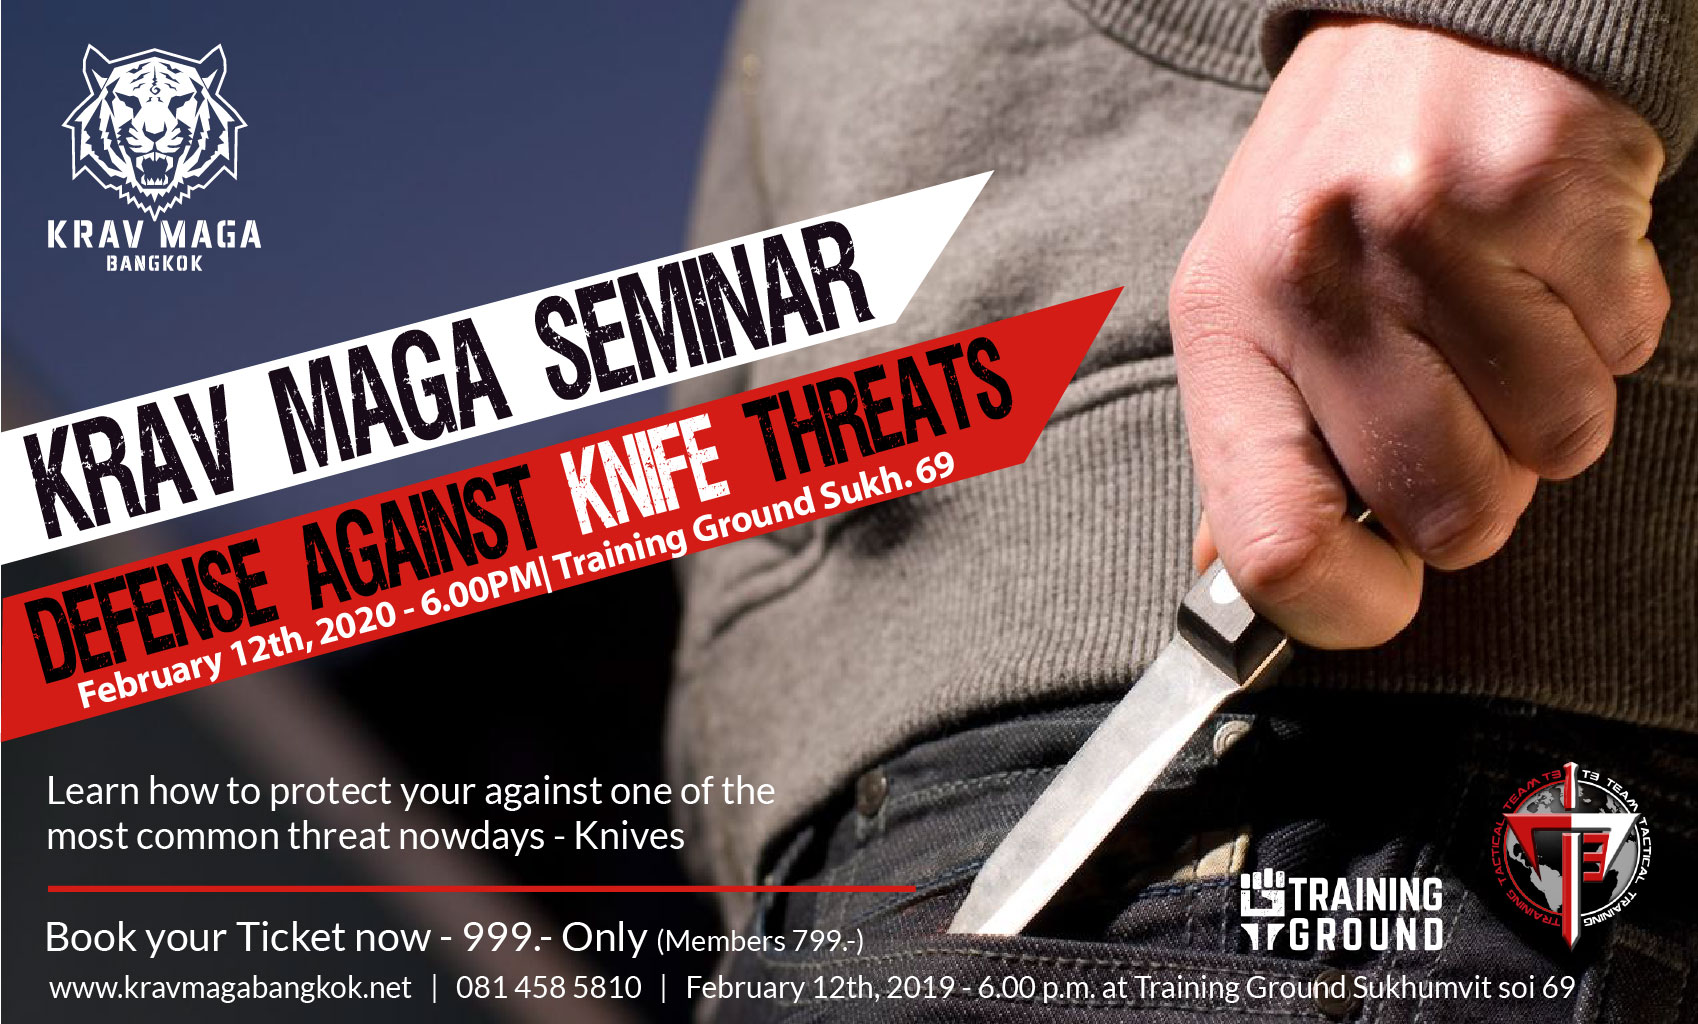 You are currently viewing Defense Against Knife Threats – Seminar